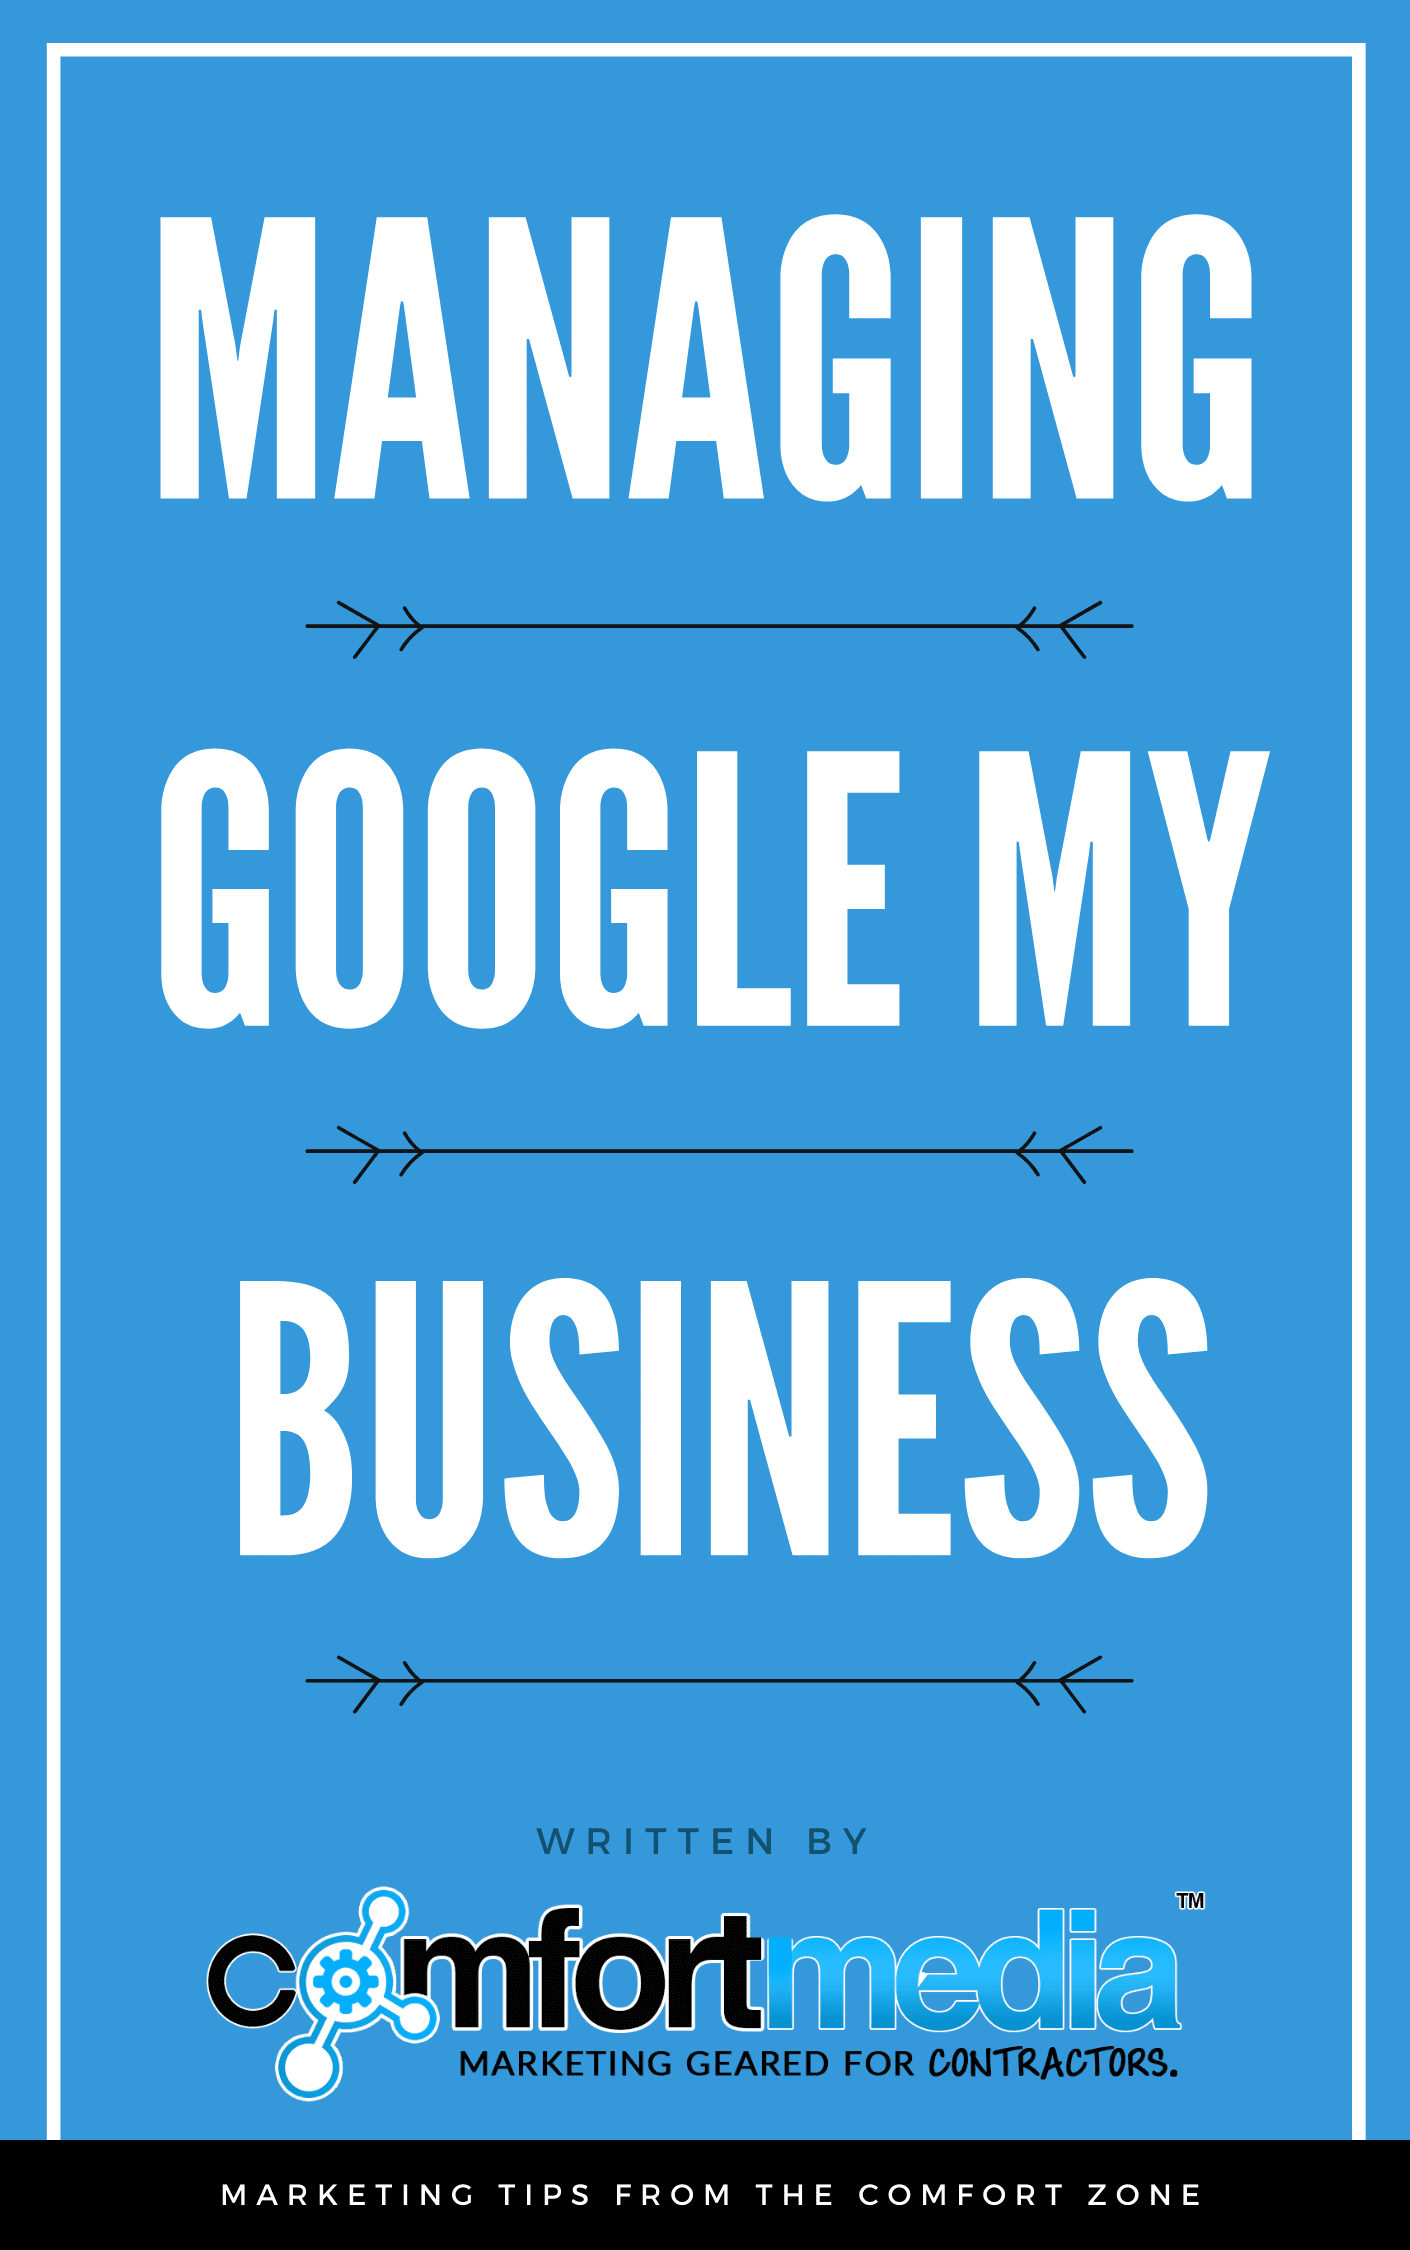 Download the Google My Business Optimization Guide